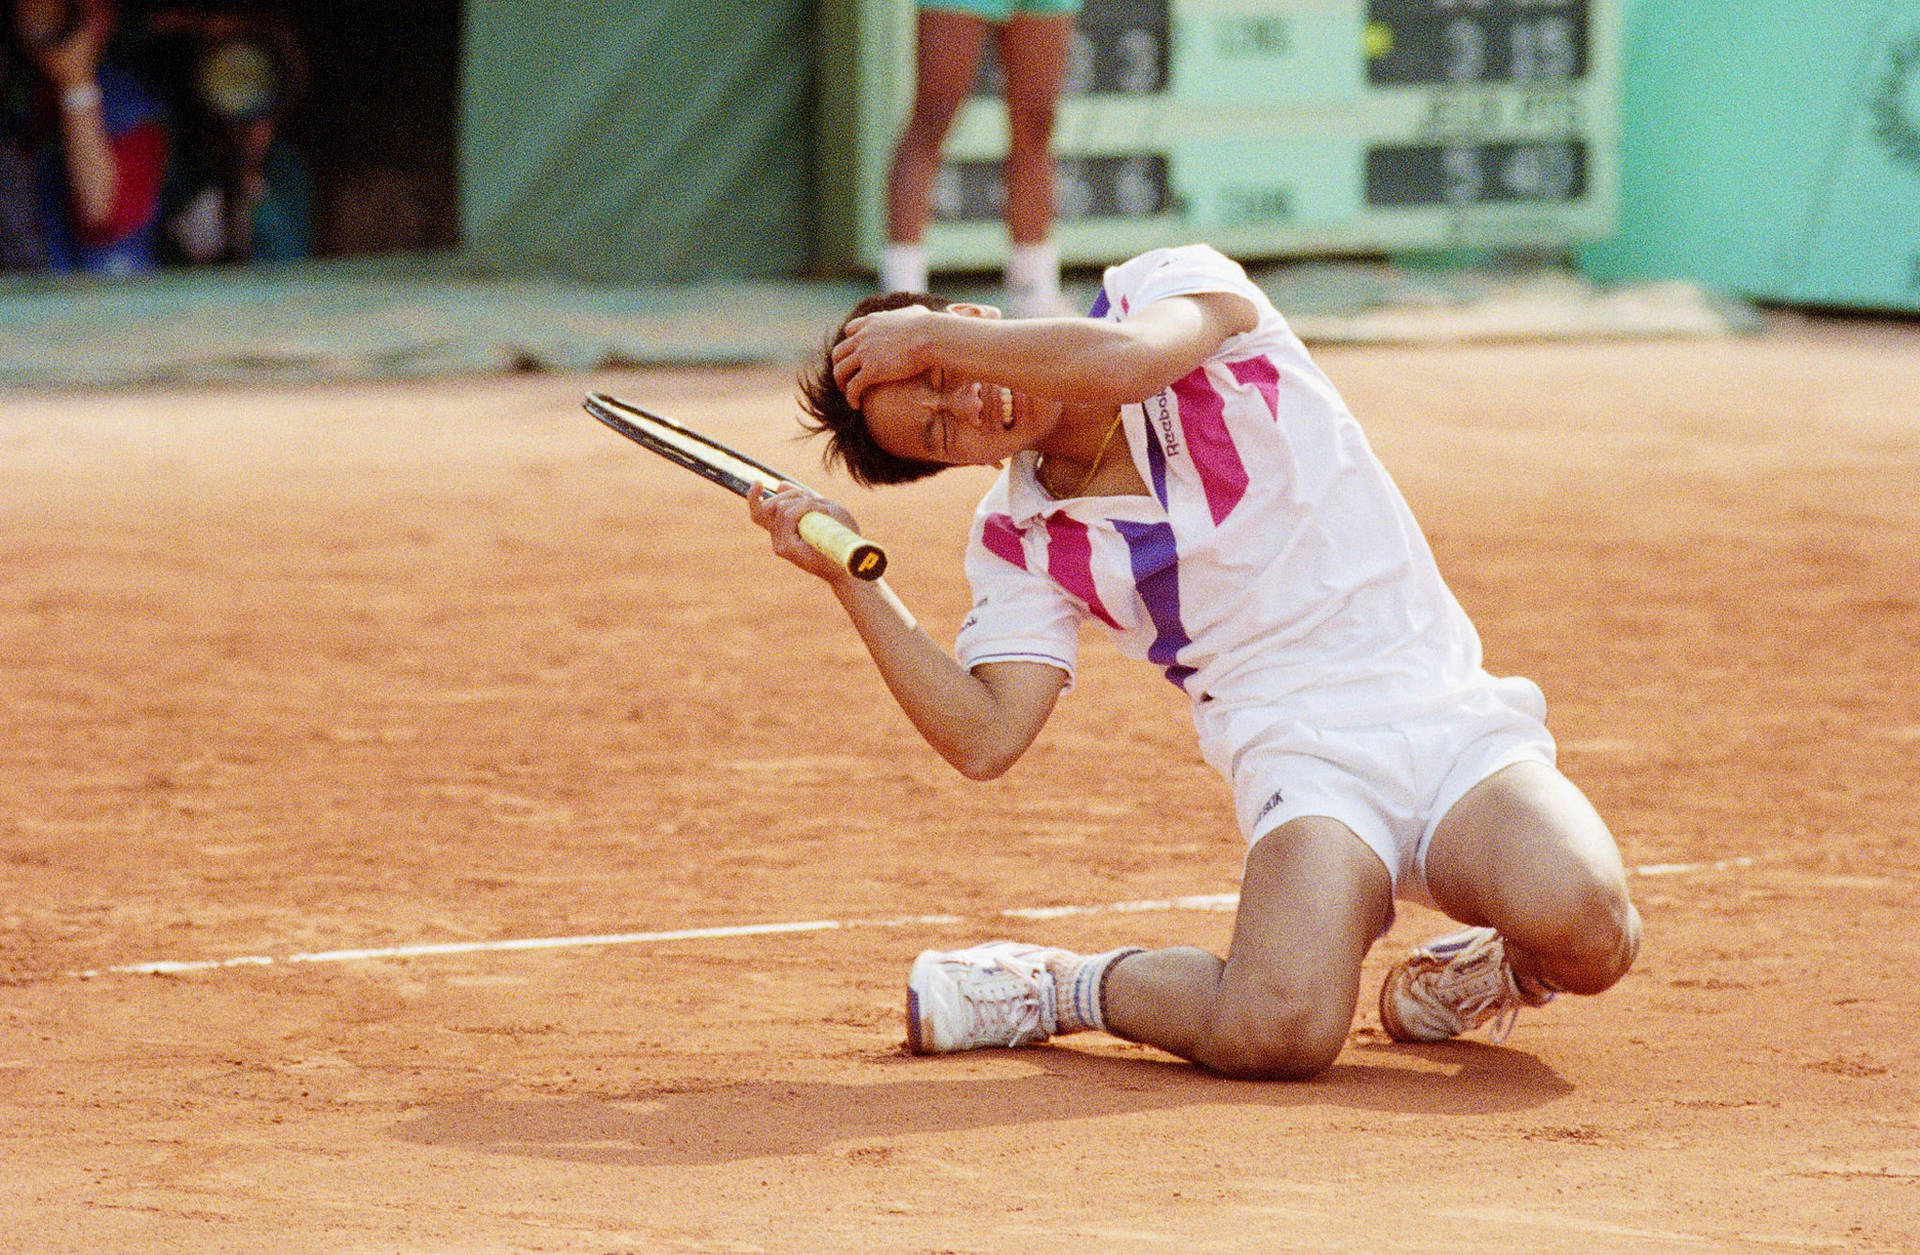 Michaelchang I Agoni. (assuming This Is Intended To Be A Title For A Computer Or Mobile Wallpaper Featuring A Picture Of Michael Chang In Pain Or Distress) Wallpaper